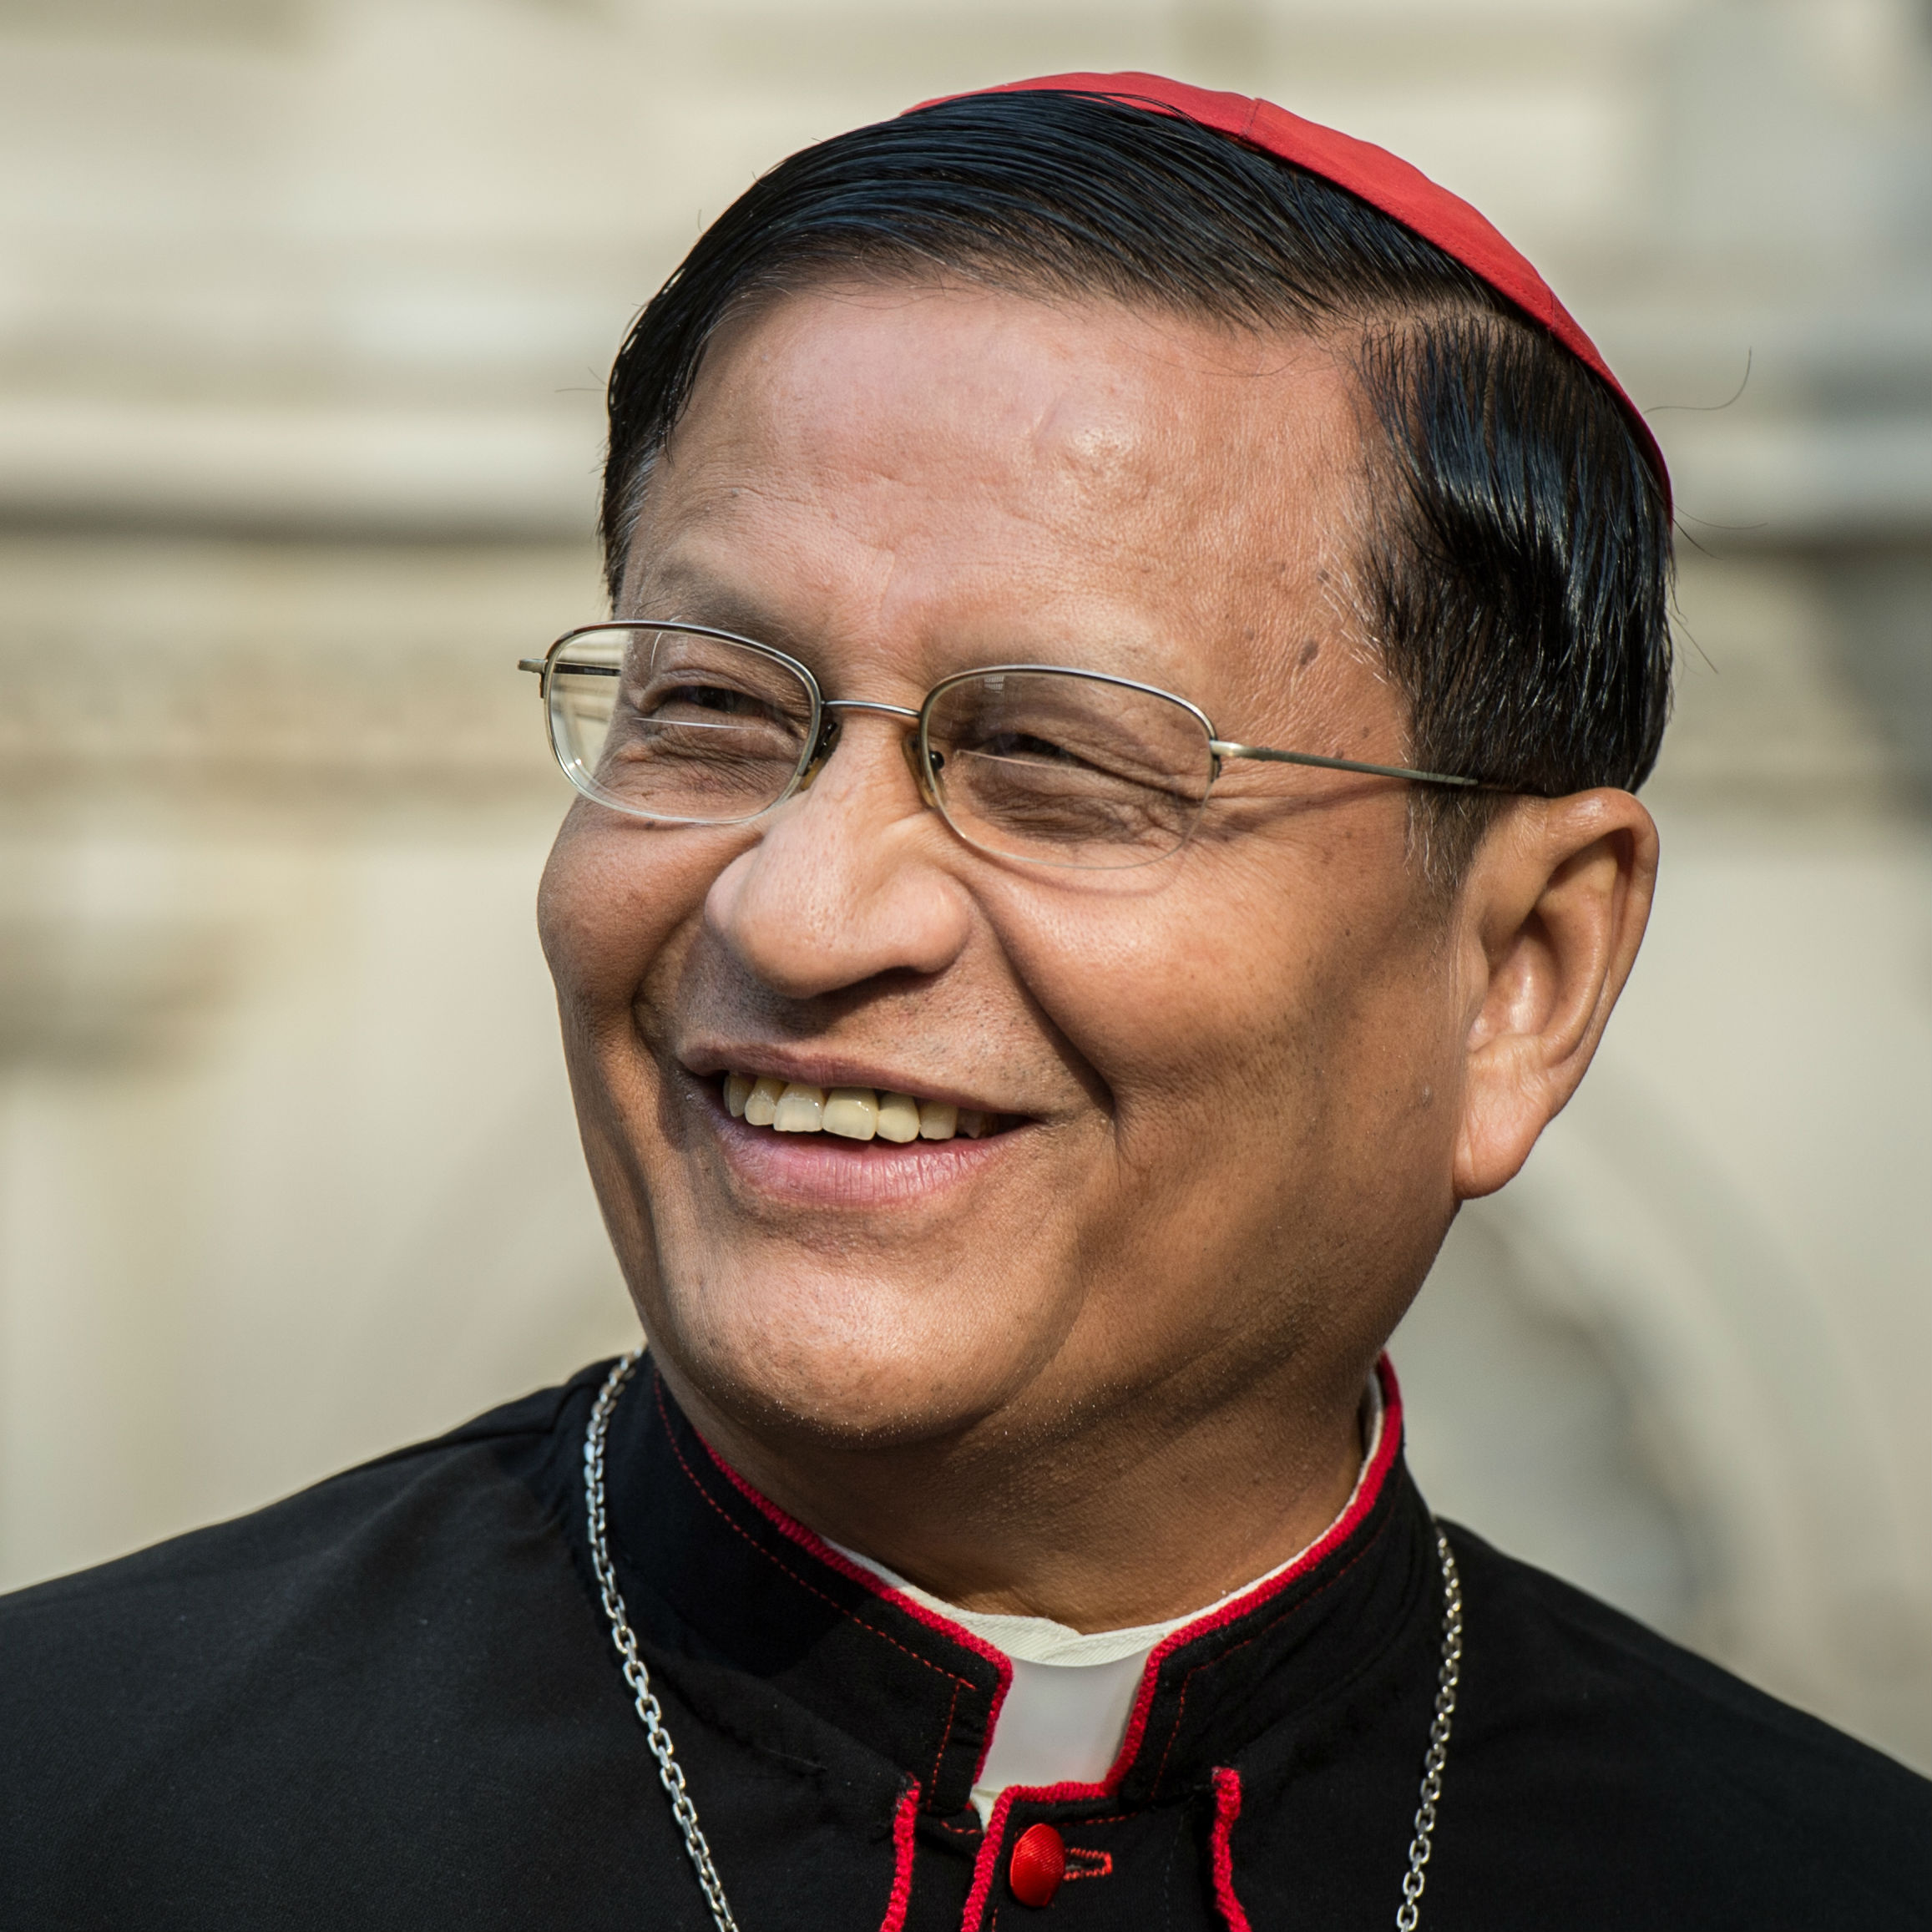 Interview: 30 minutes with Cardinal Charles Maung Bo from Burma